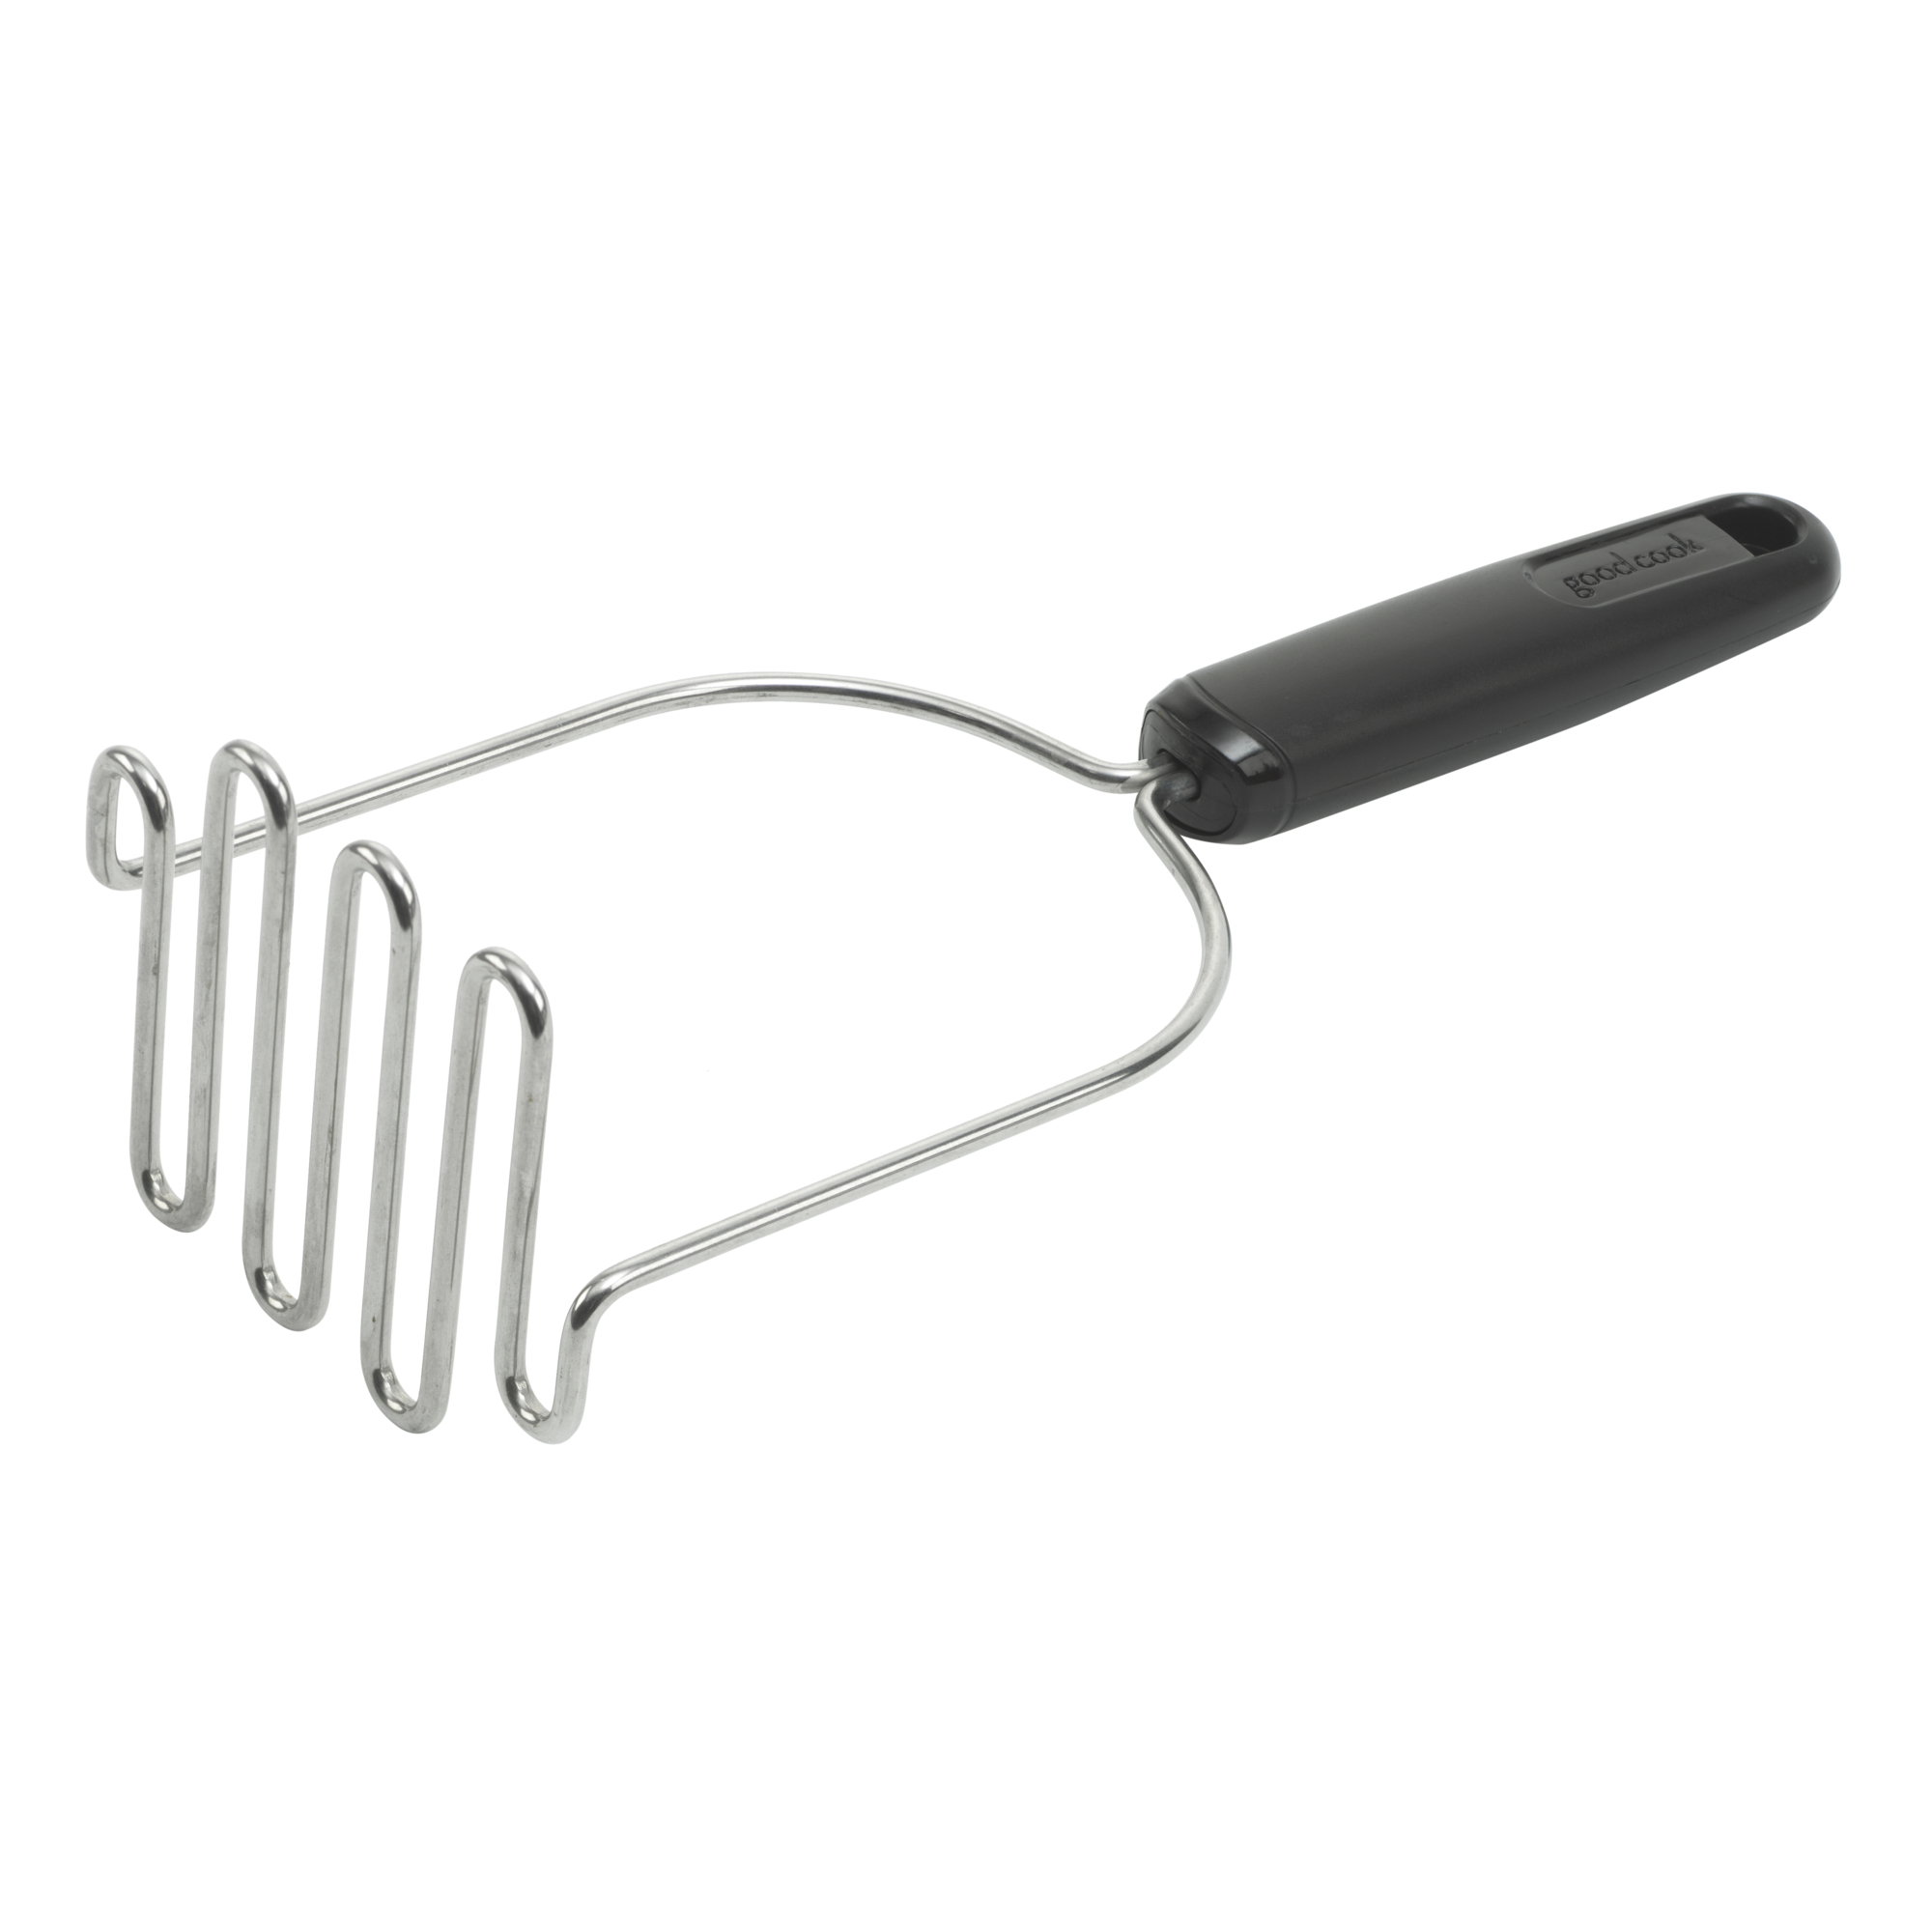 GoodCook 9.5" Stainless Steel Potato Masher and Meat Chopper Tool, Silver/Black - image 3 of 5